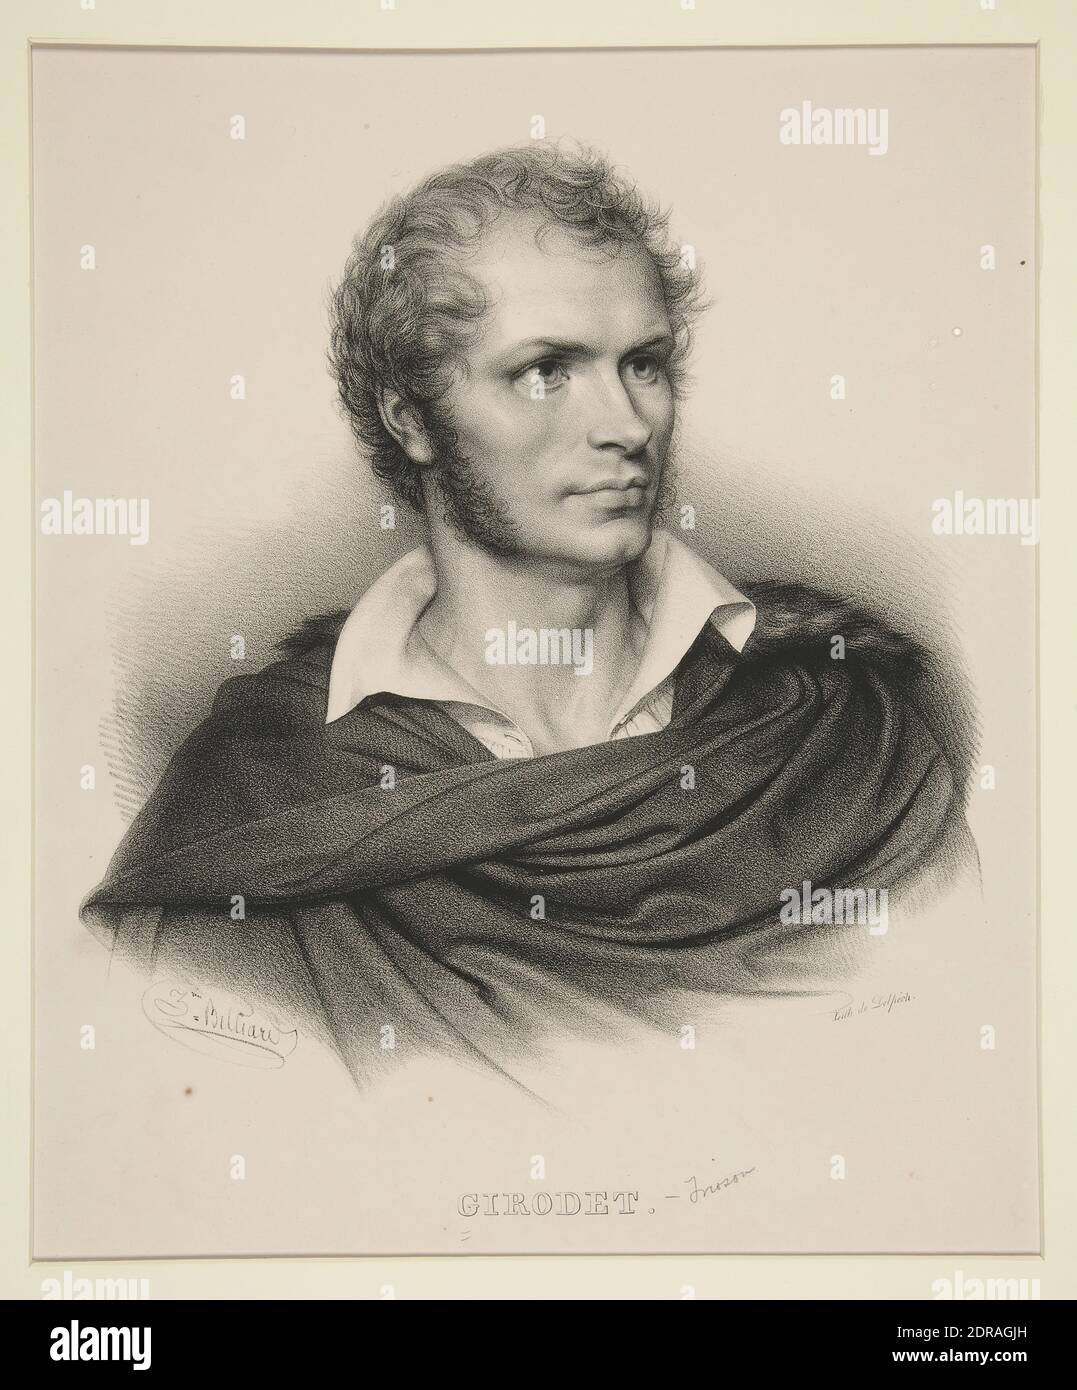 Artist: François-Séraphin Delpech, French, 1778–1825, After: Zéphirin Félix Jean Marius Belliard, French, 1798–1843, Portrait of Girodet, Lithograph, Sheet: 49.6 × 31.3 cm (19 1/2 × 12 5/16 in.), French, 19th century, Works on Paper - Prints Stock Photo